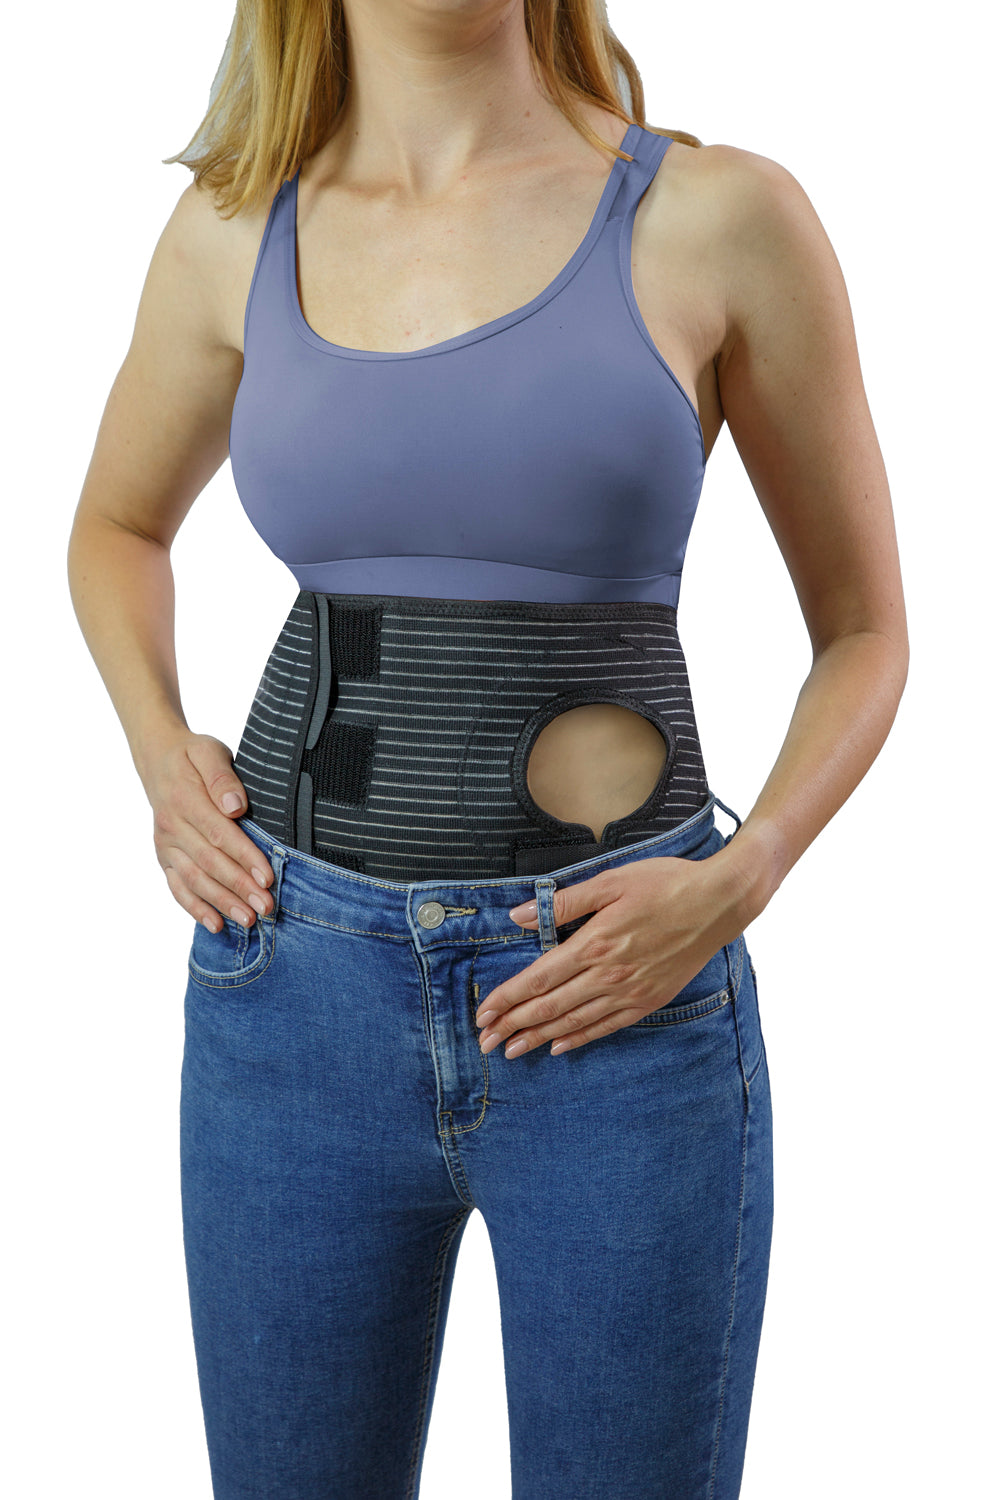 Movibrace Abdominal Brace for Hanging Belly, Weak Abdominal and Lower Back  Muscles - Large